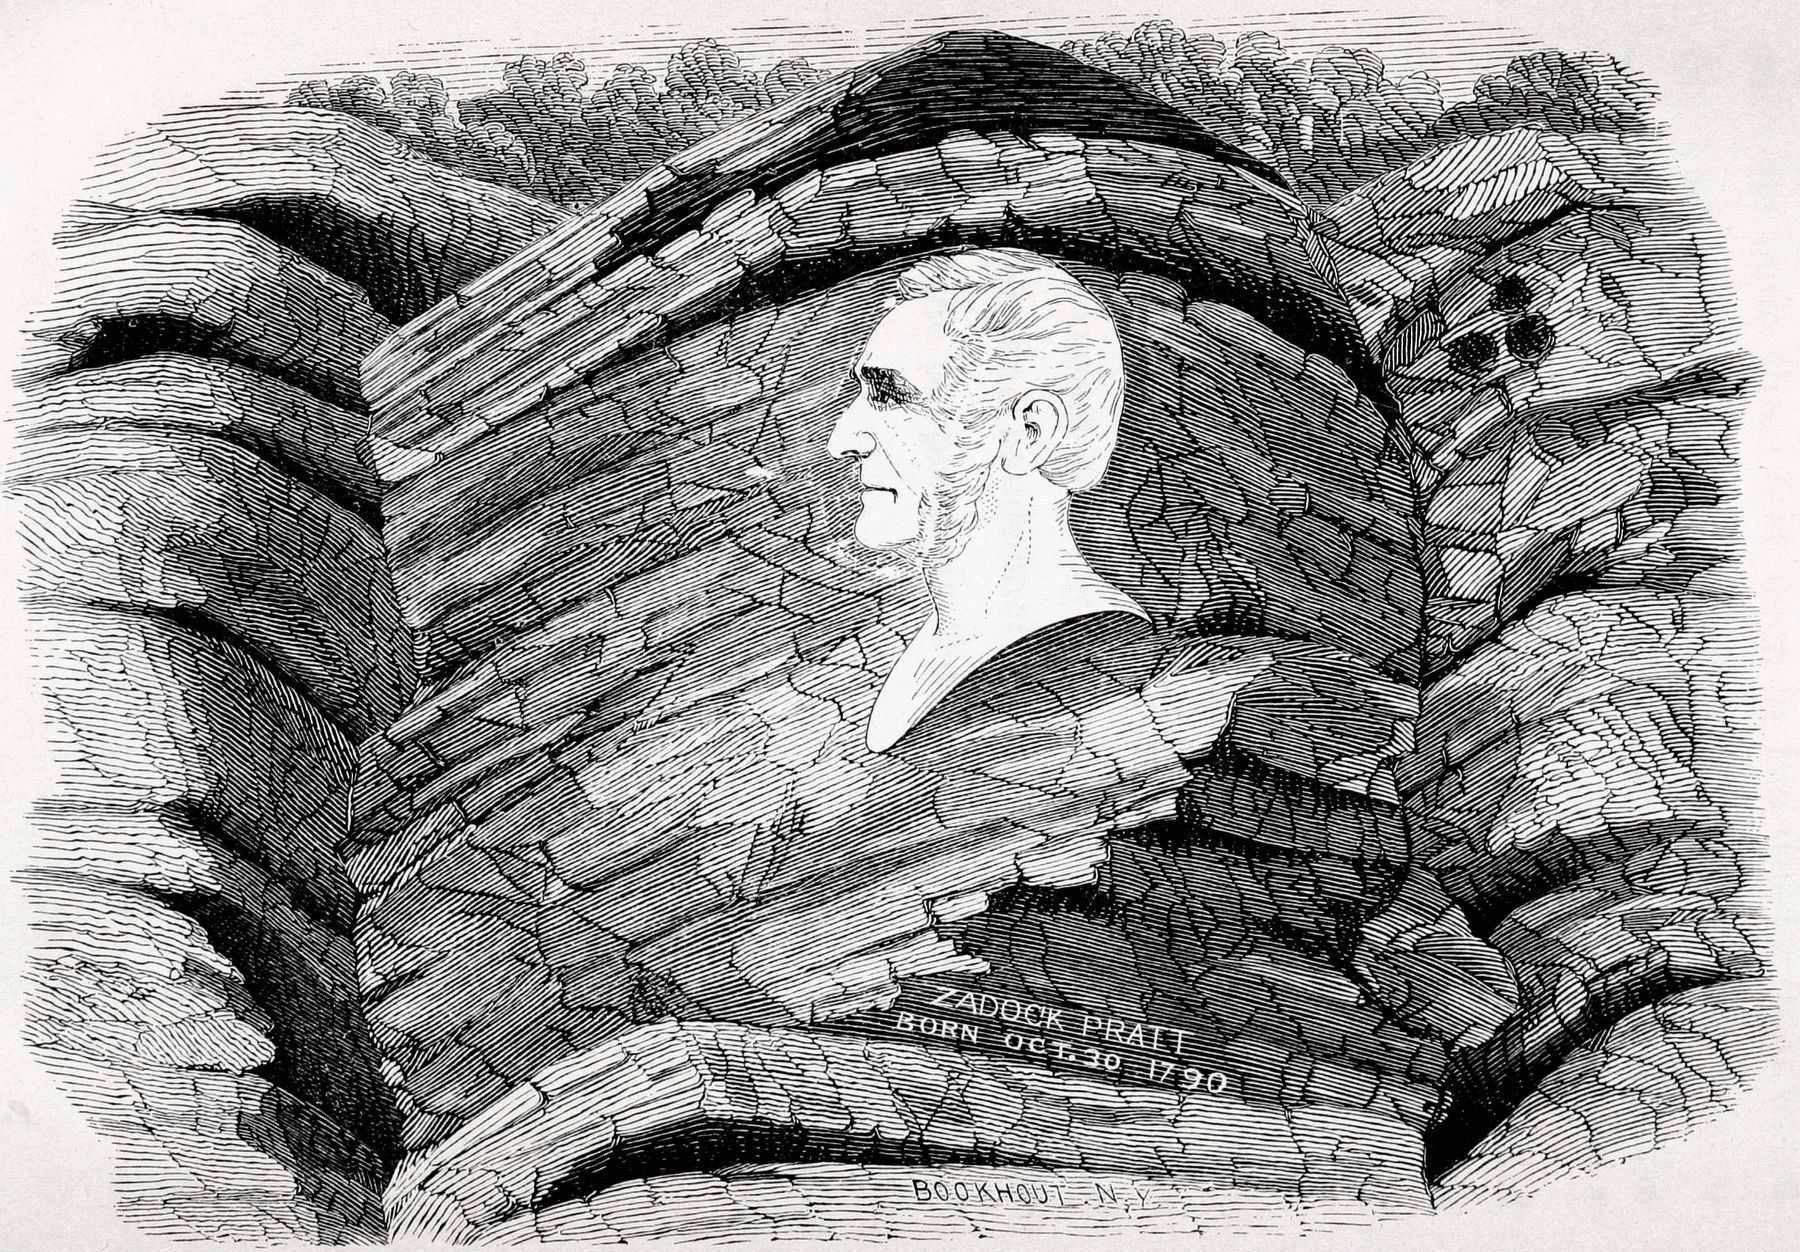 Bust on the Rock<br>Zadock Pratt<br>Born Oct. 30 1790 image. Click for full size.